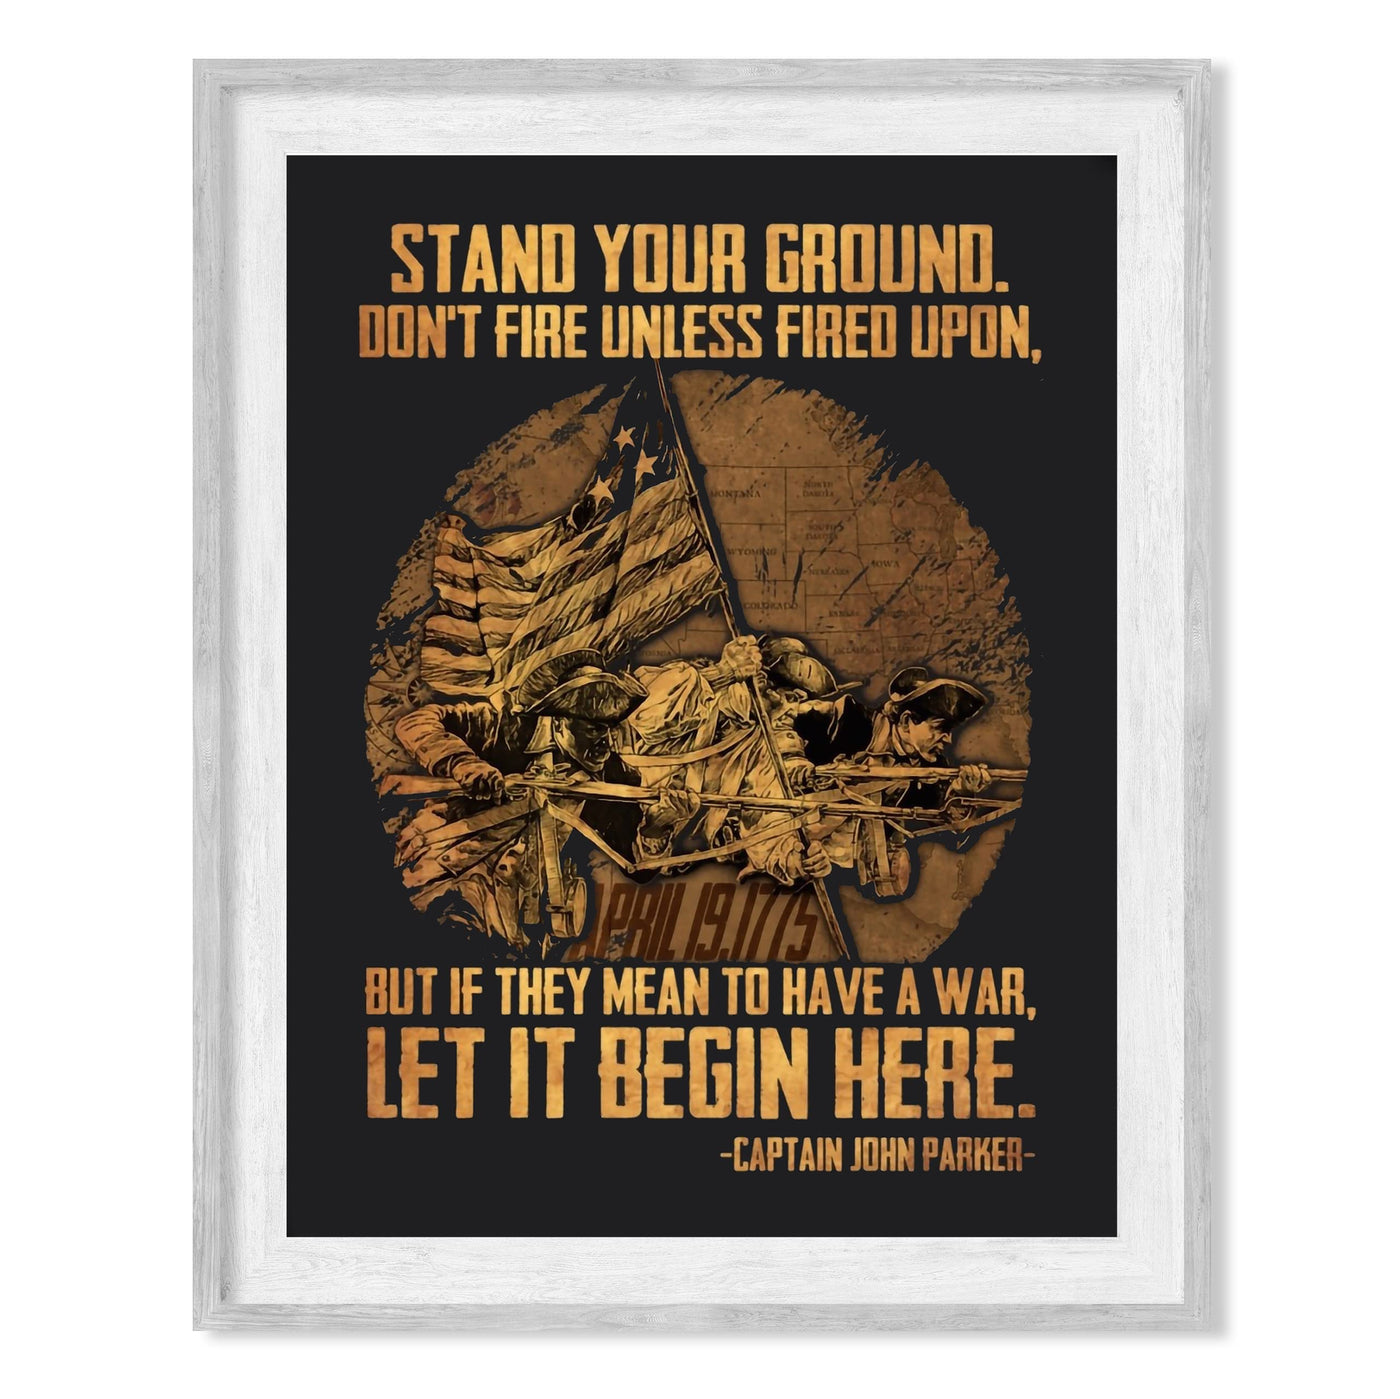 Captain John Parker Quotes-"Stand Your Ground"-American History Wall Art -8 x10" Vintage US Military American Flag Print -Ready to Frame. Home-Office-Classroom-Bar-Cave Decor. Great Patriotic Gift!